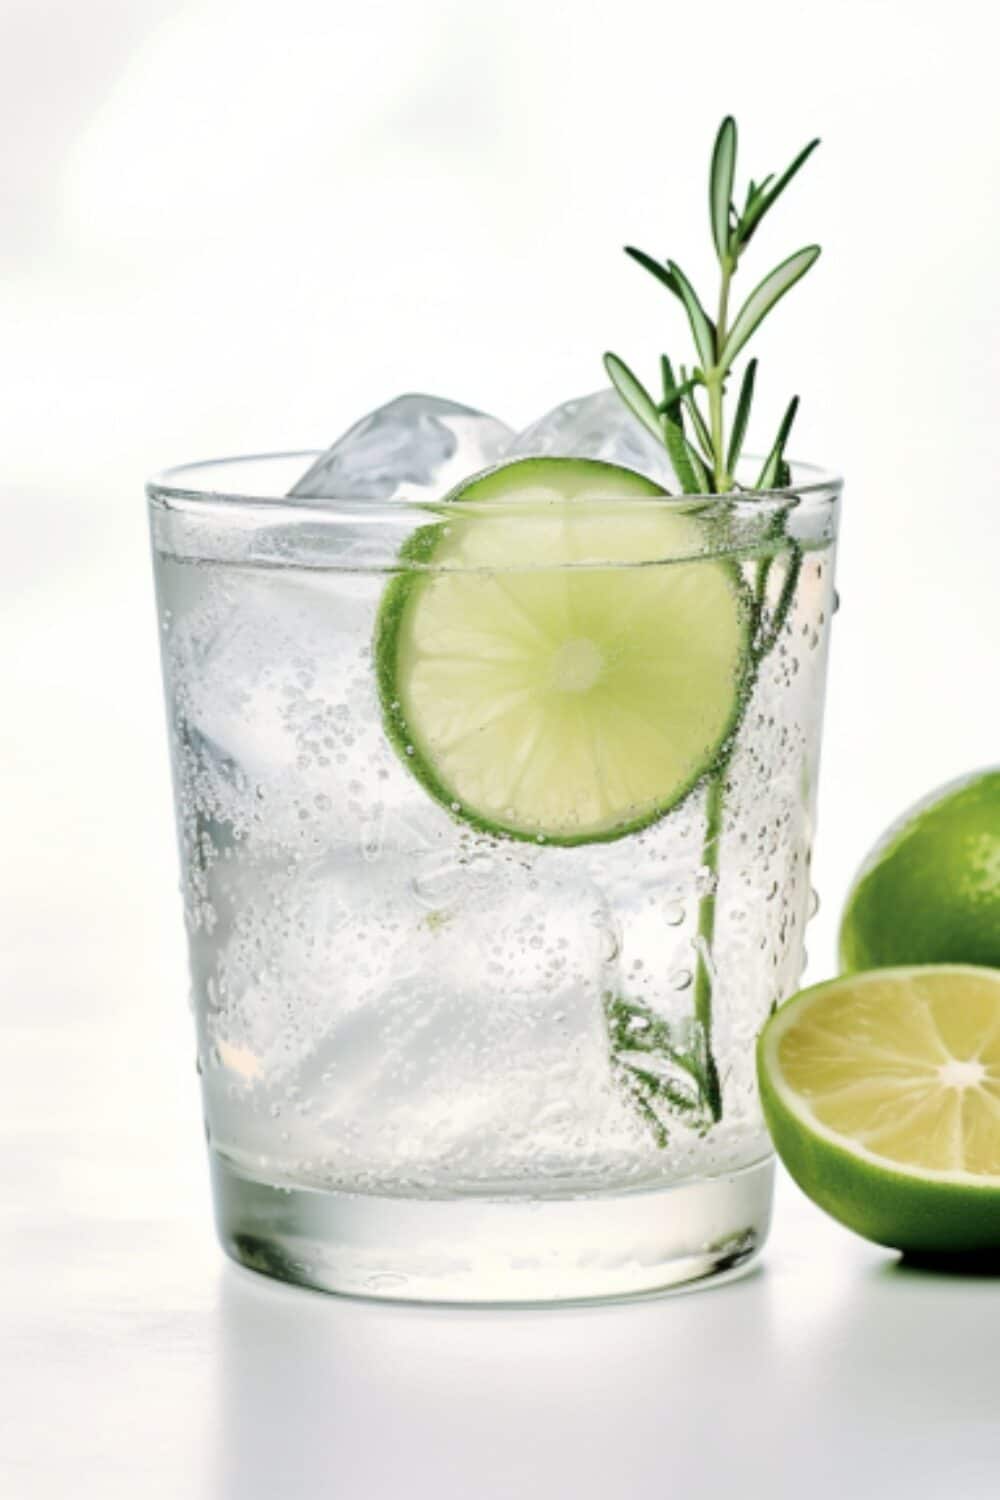 A classic clear cocktail with a hint of lime, combining gin with a sugar-free tonic water, served over ice.